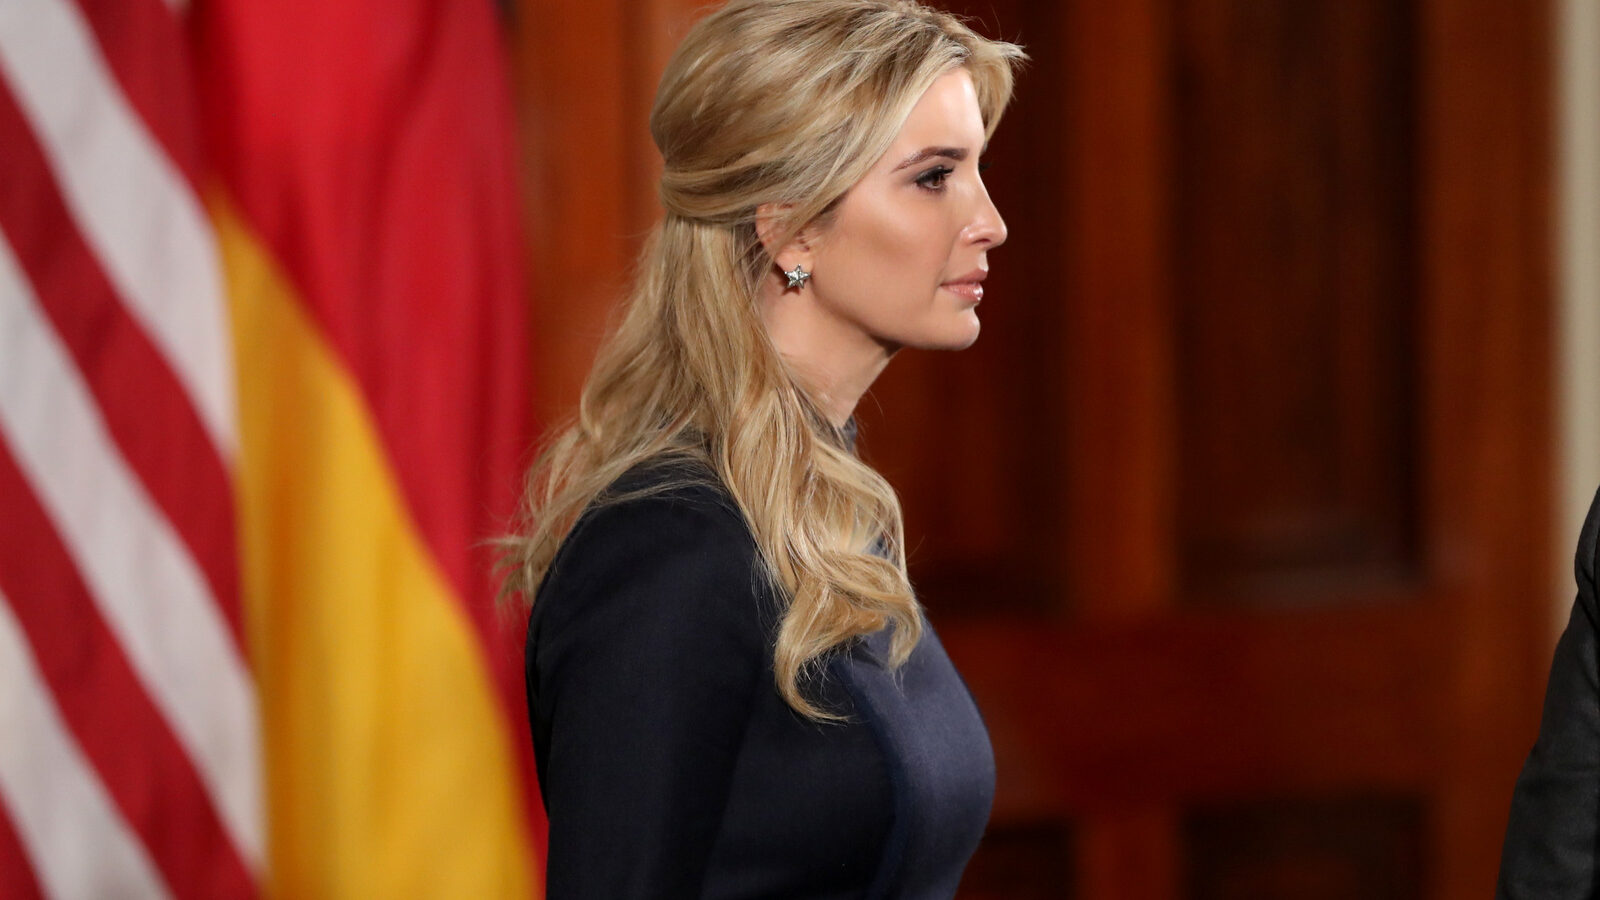 Ivanka Trump, the daughter of President Donald Trump, arrives before a joint news conference with President Donald Trump and German Chancellor Angela Merkel in the East Room of the White House in Washington, Friday, March 17, 2017. (AP/Andrew Harnik)